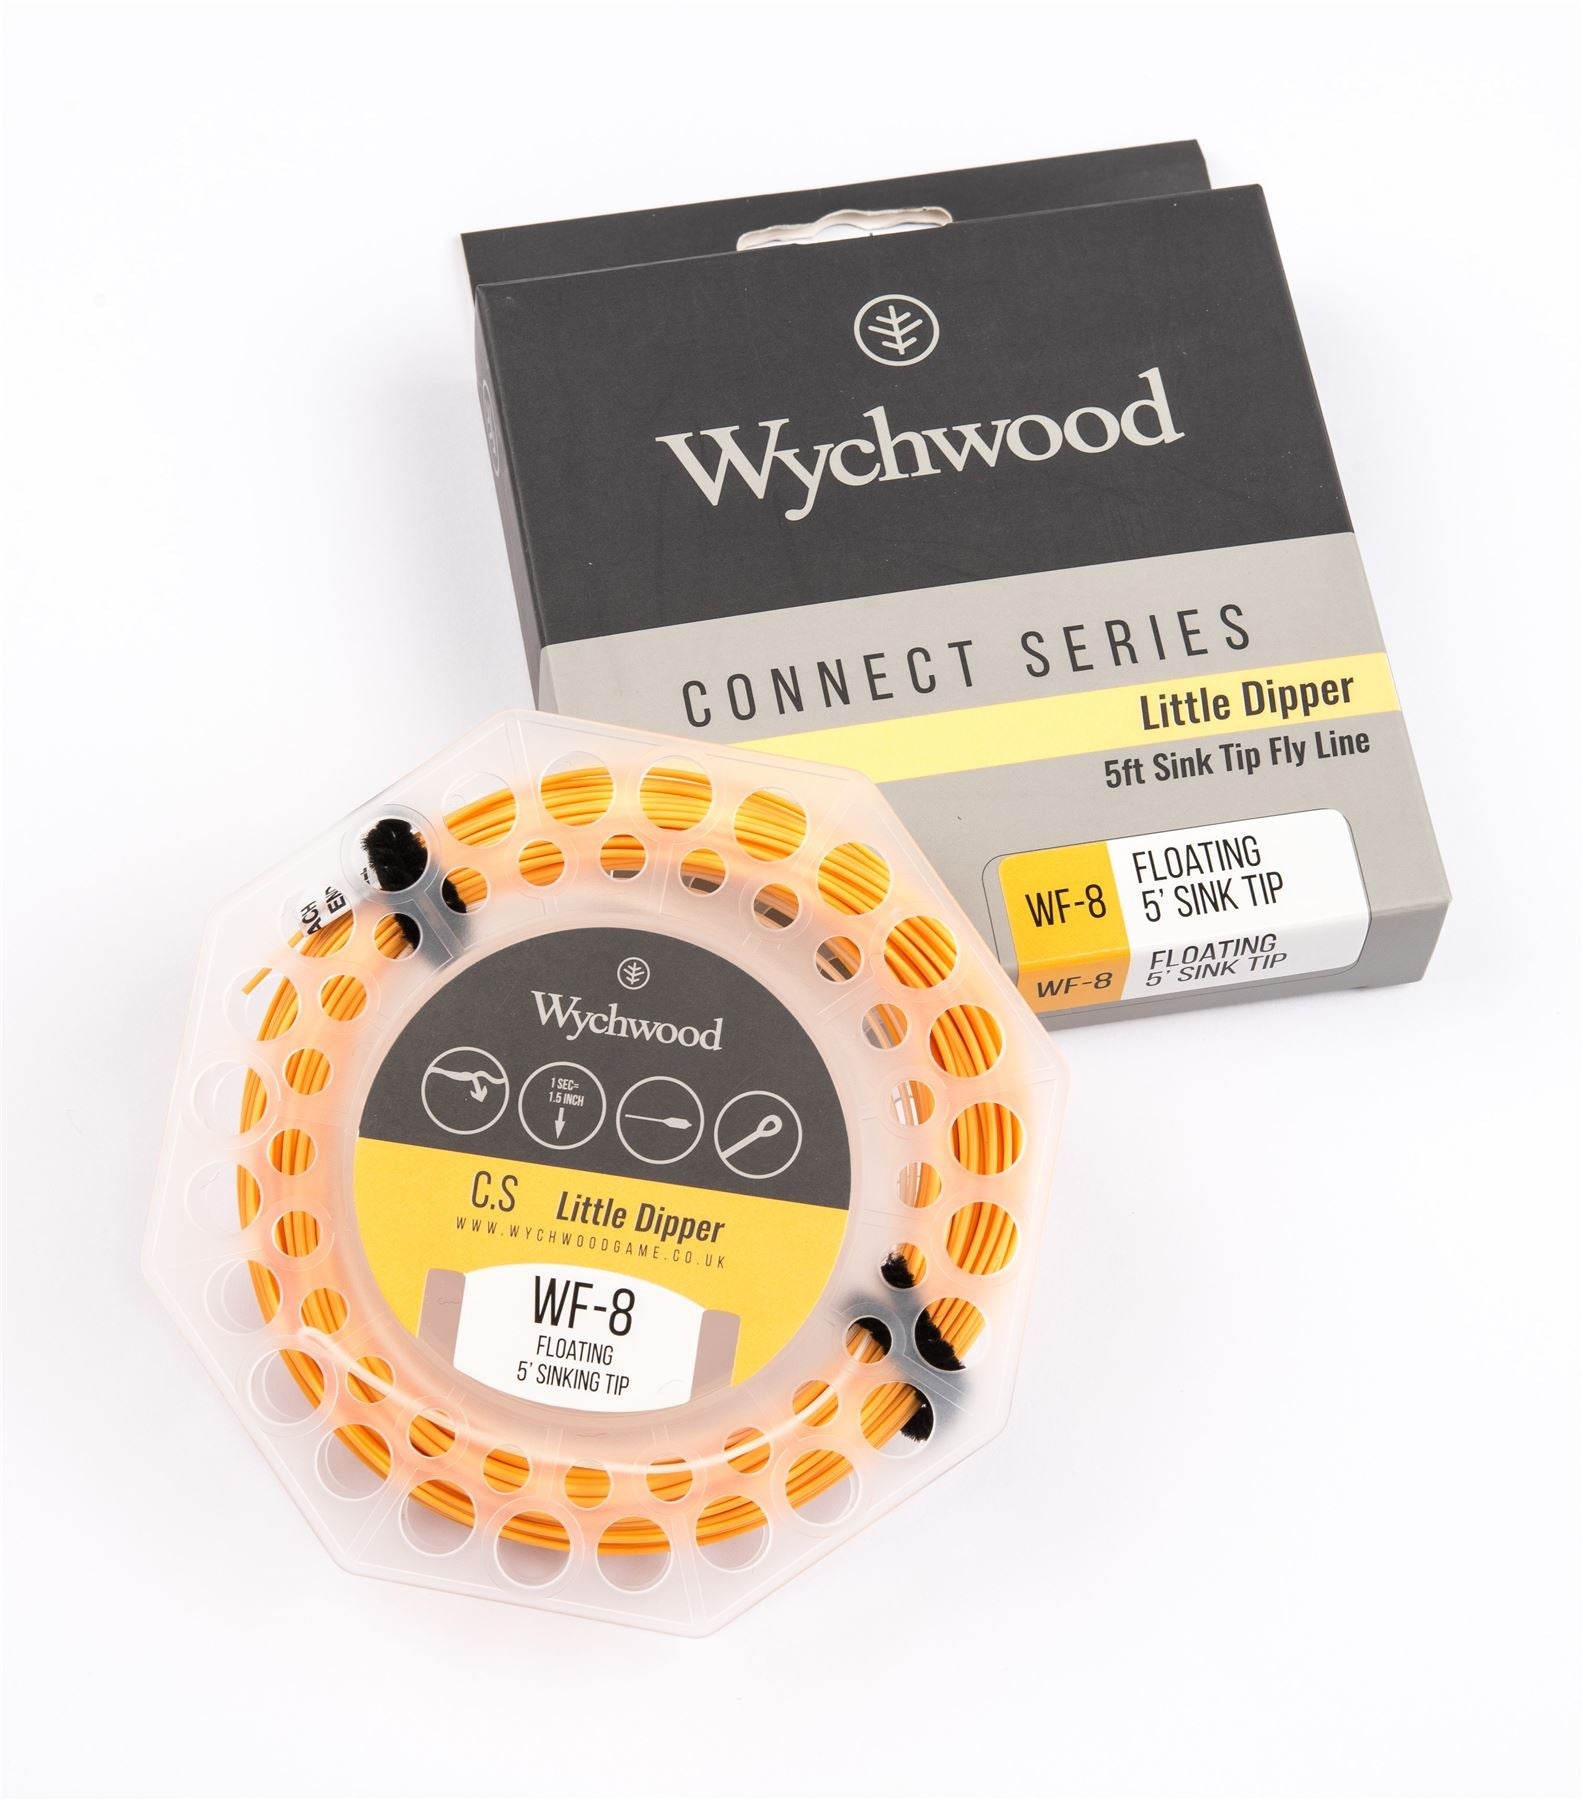 Wychwood Connect Series Little Dipper 6-wt Fly Line